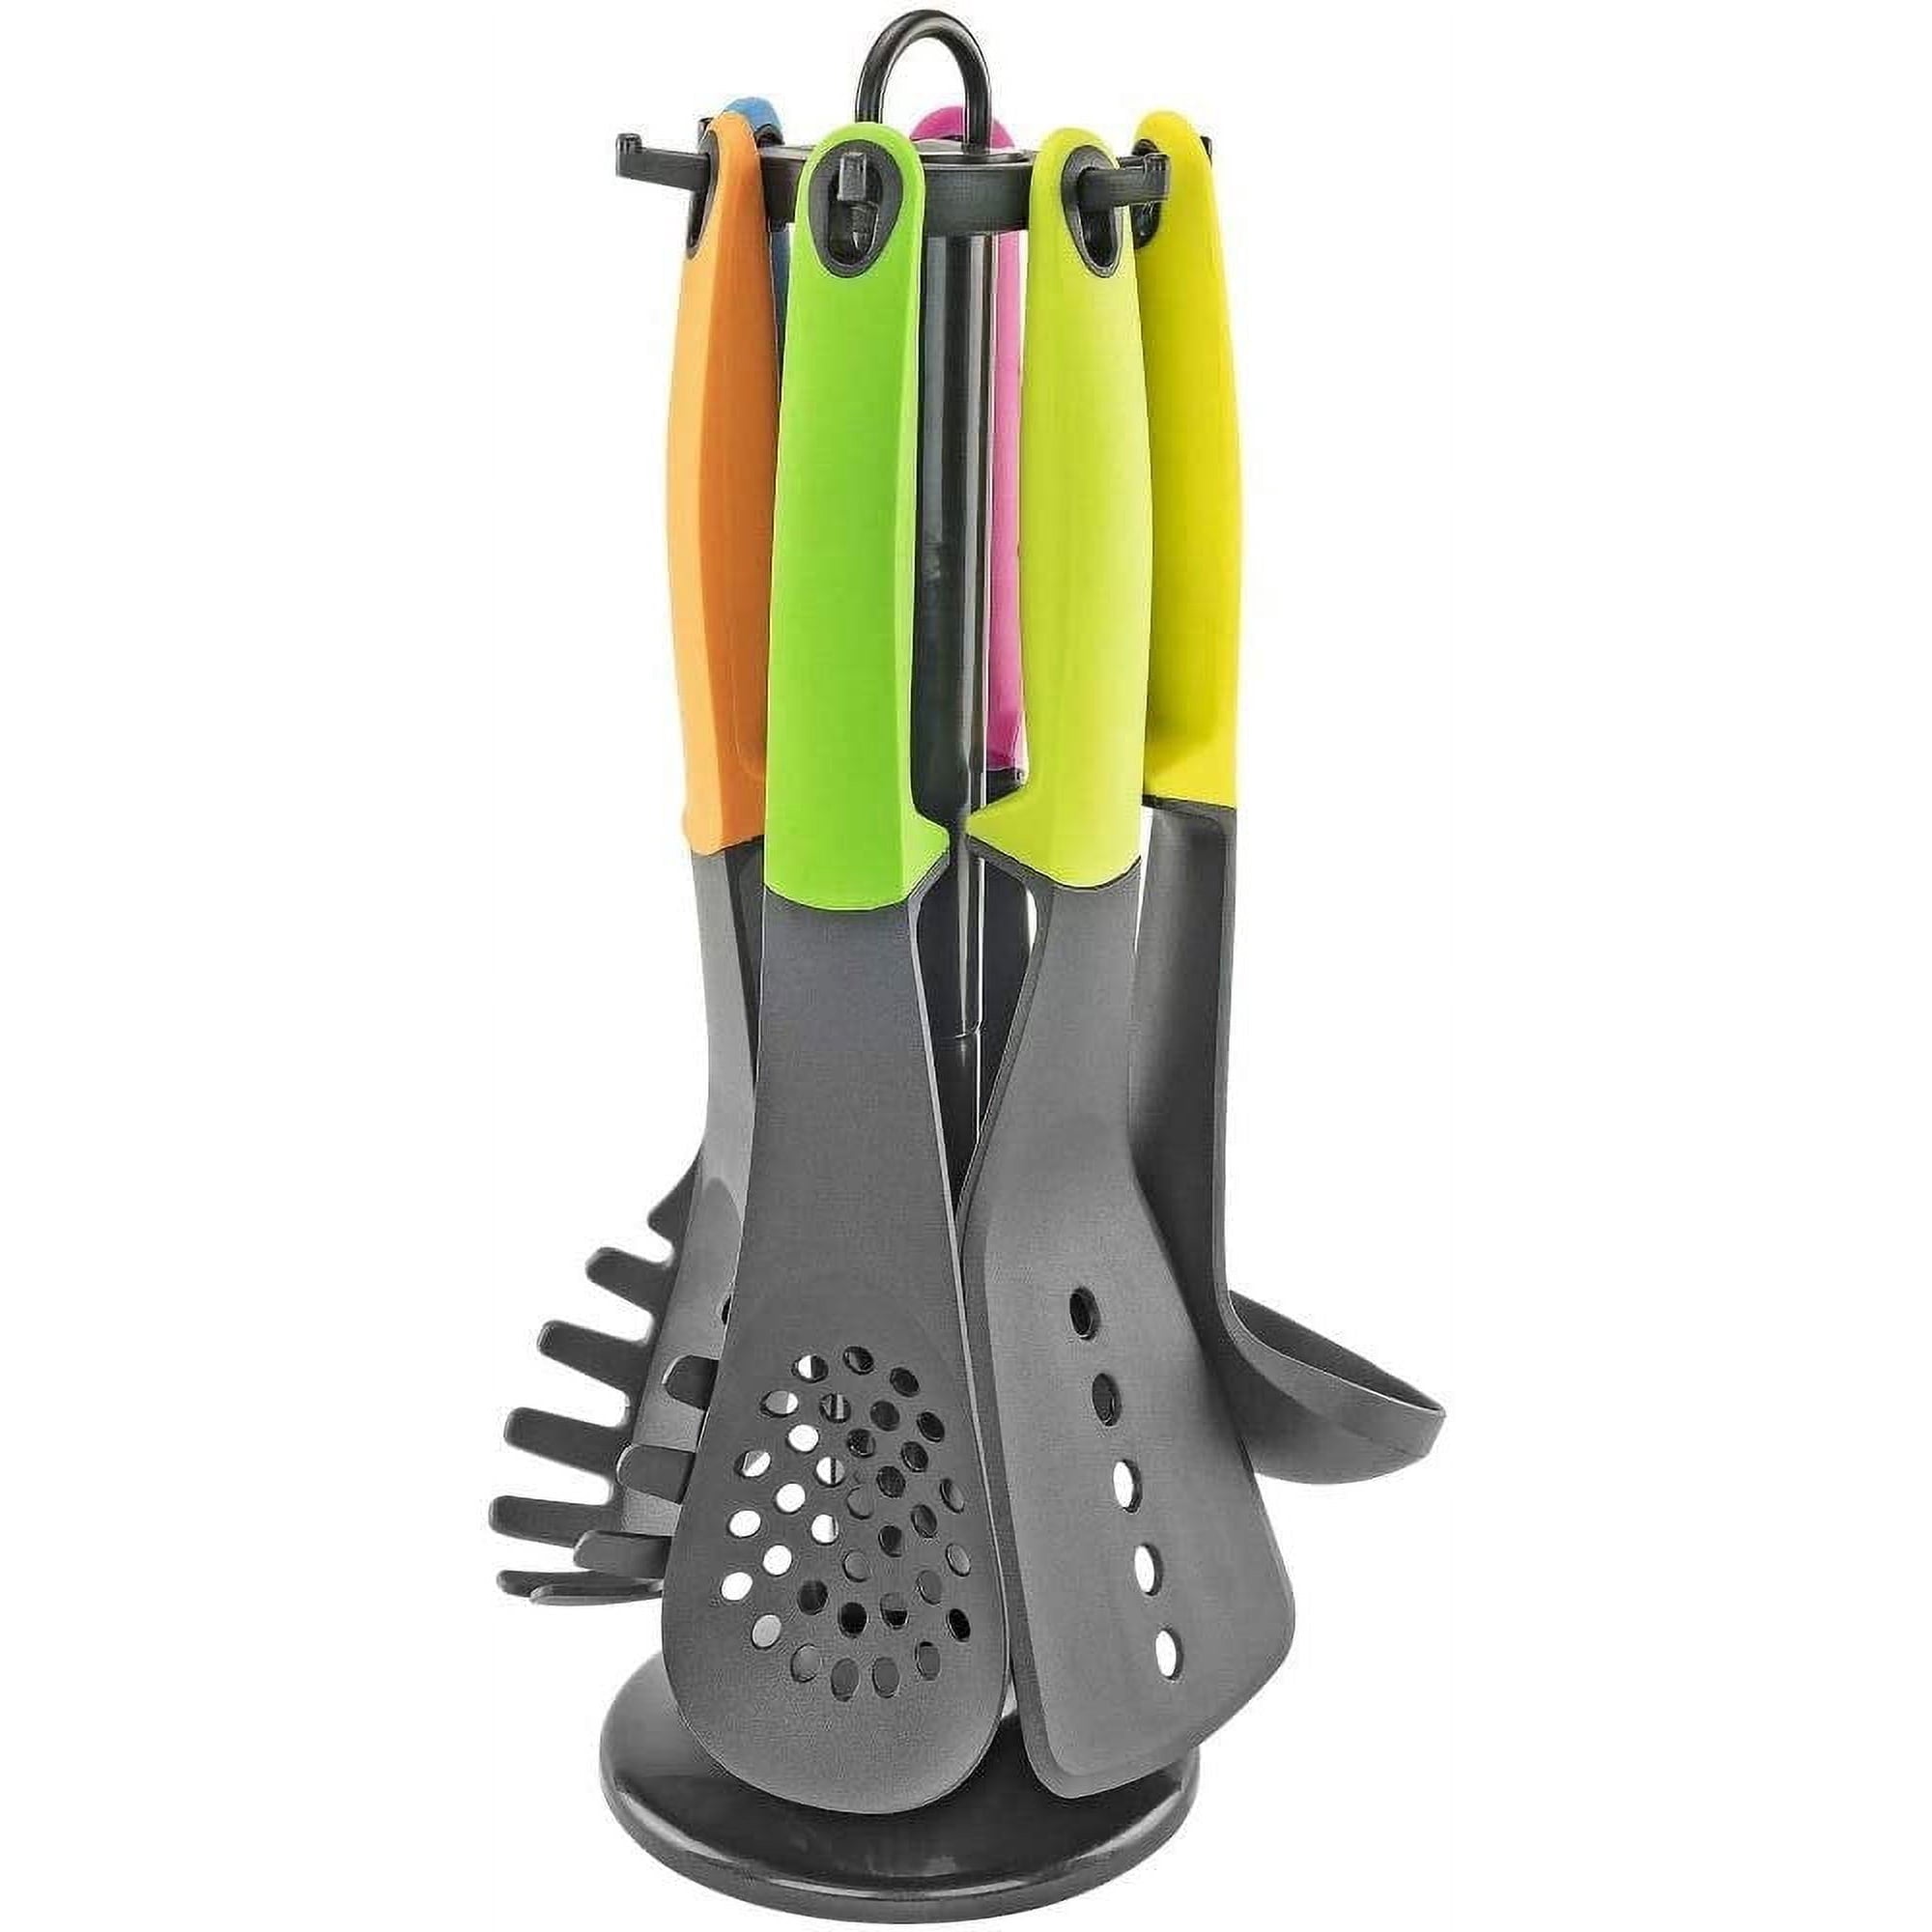 Image of Set of 7 Kitchen Utensils w/Holder, Silicone Handles - Includes Ladle, Spatula, Spoon, Spaghetti Server, and More